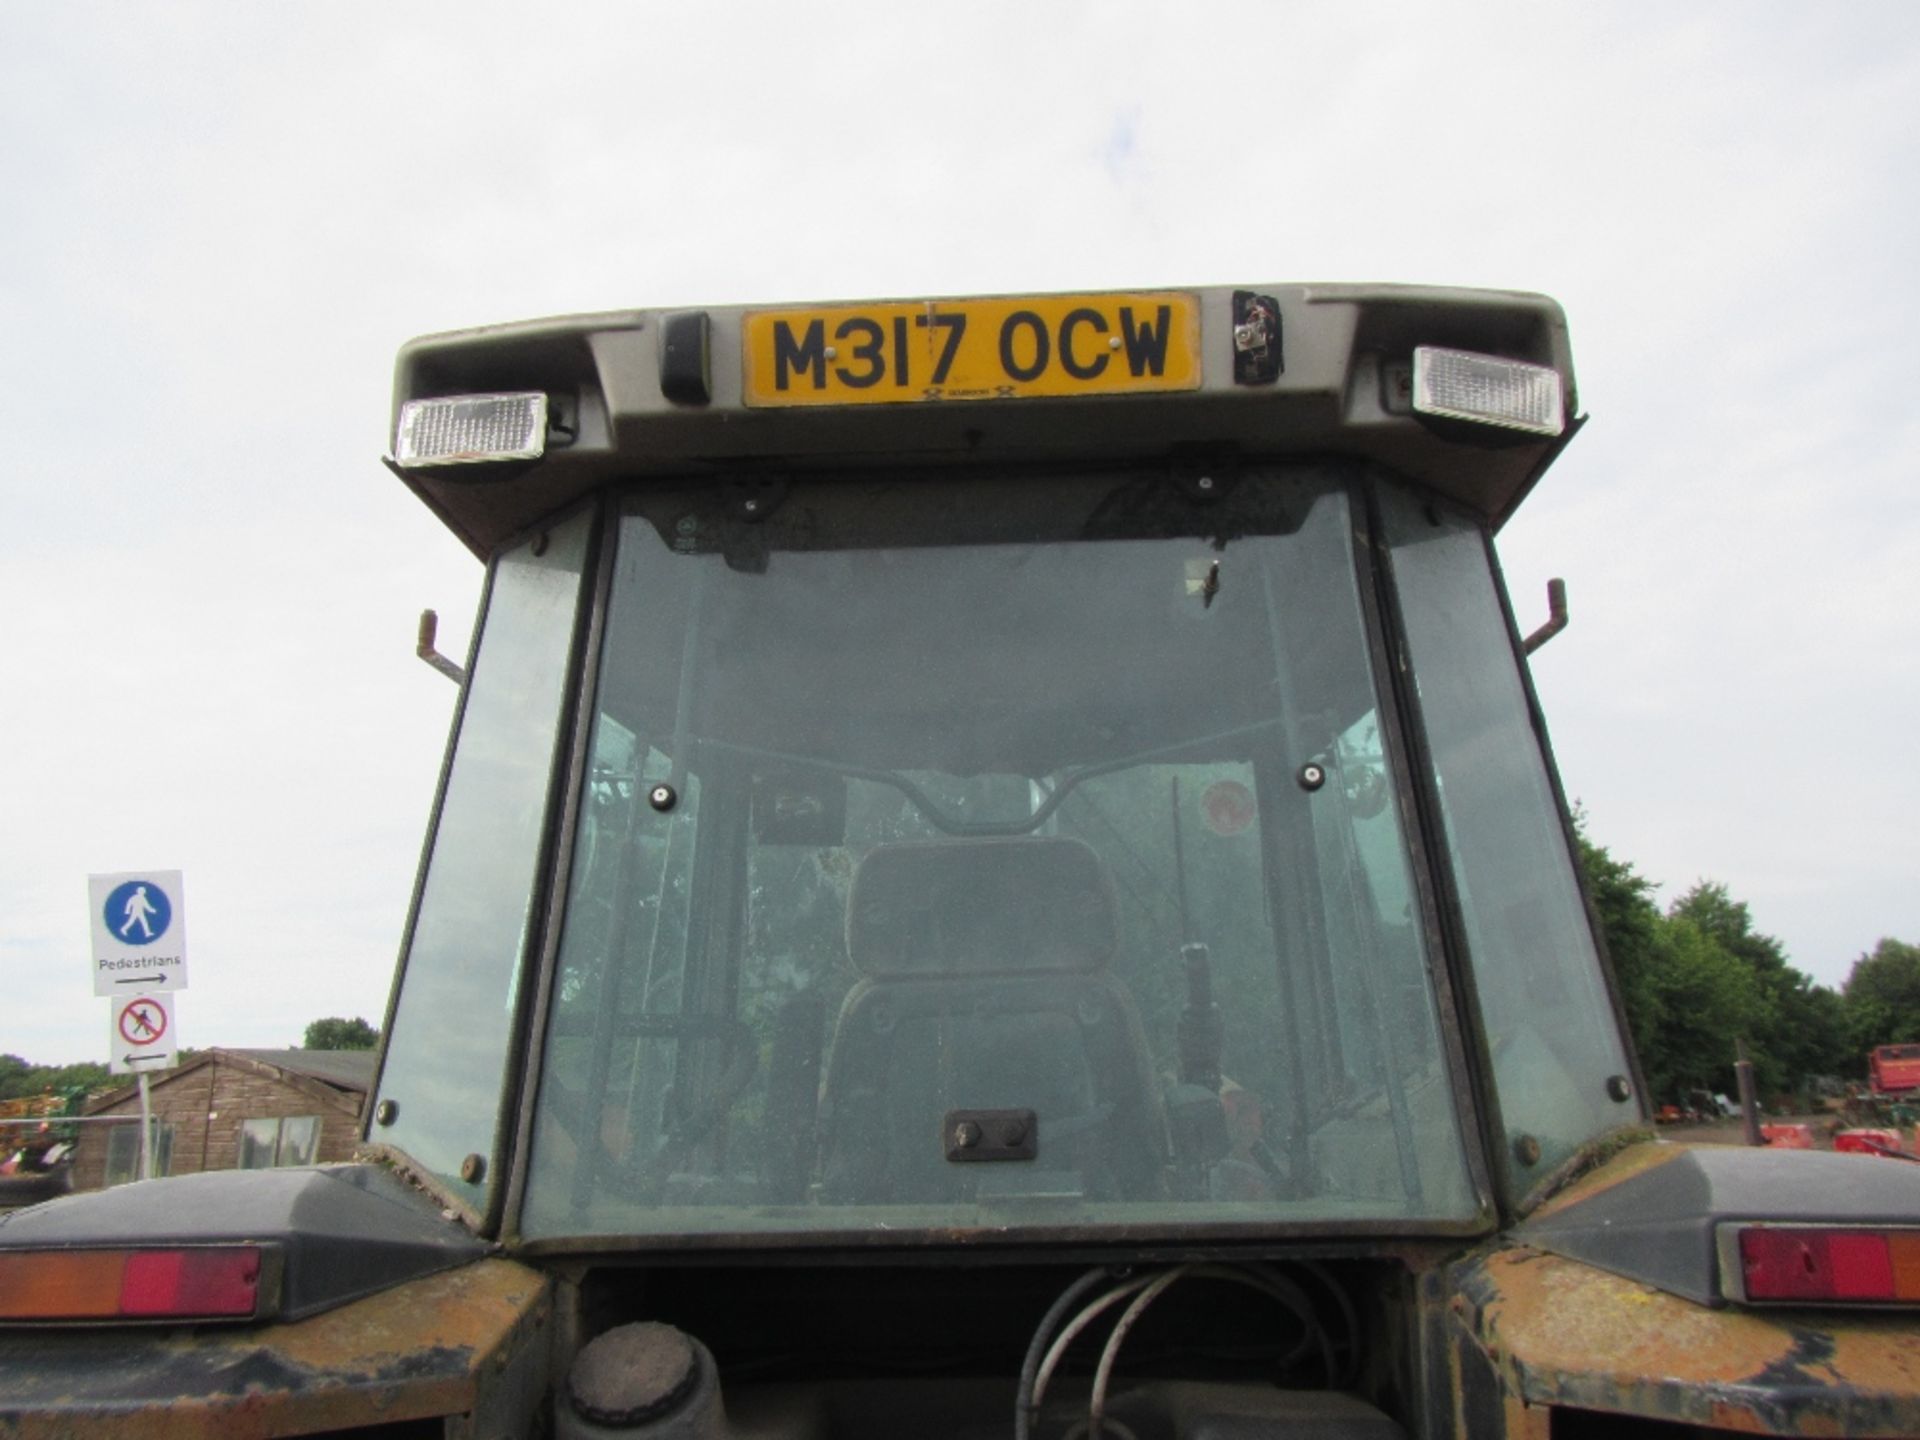 1994 Massey Ferguson 3090 4wd Tractor with Front Loader. Reg. No. M317 OCW Ser No C201010 - Image 9 of 18